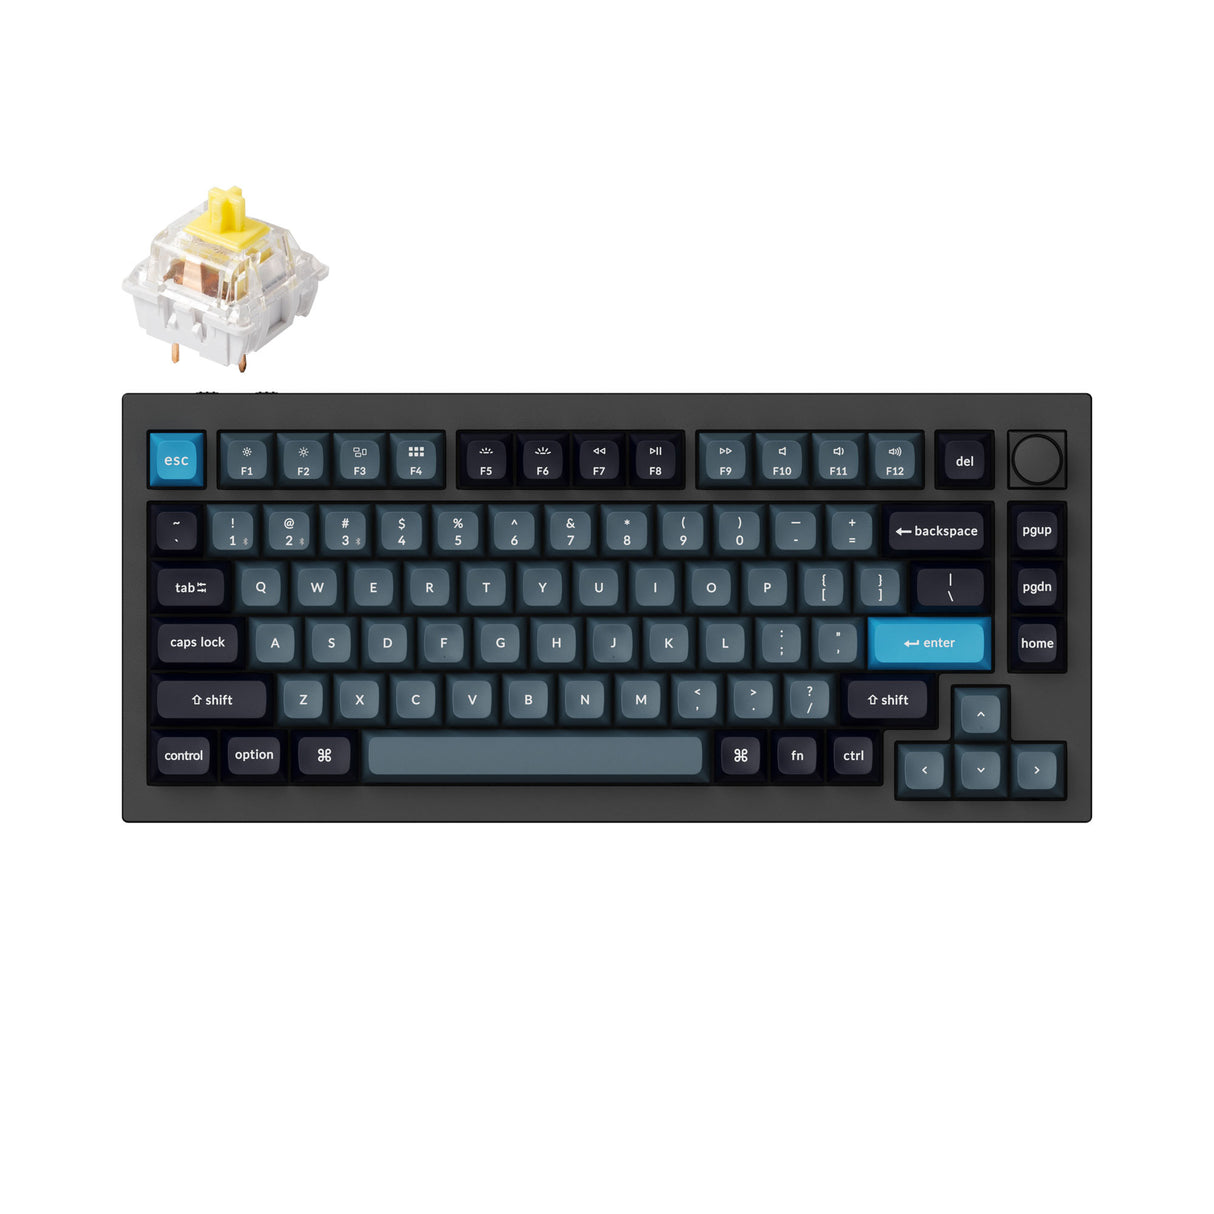 Keychron Q1 Pro QMK/VIA wireless custom mechanical keyboard 75% layout full aluminum black frame for Mac WIndows Linux with RGB backlight and hot-swappable K Pro switch banana